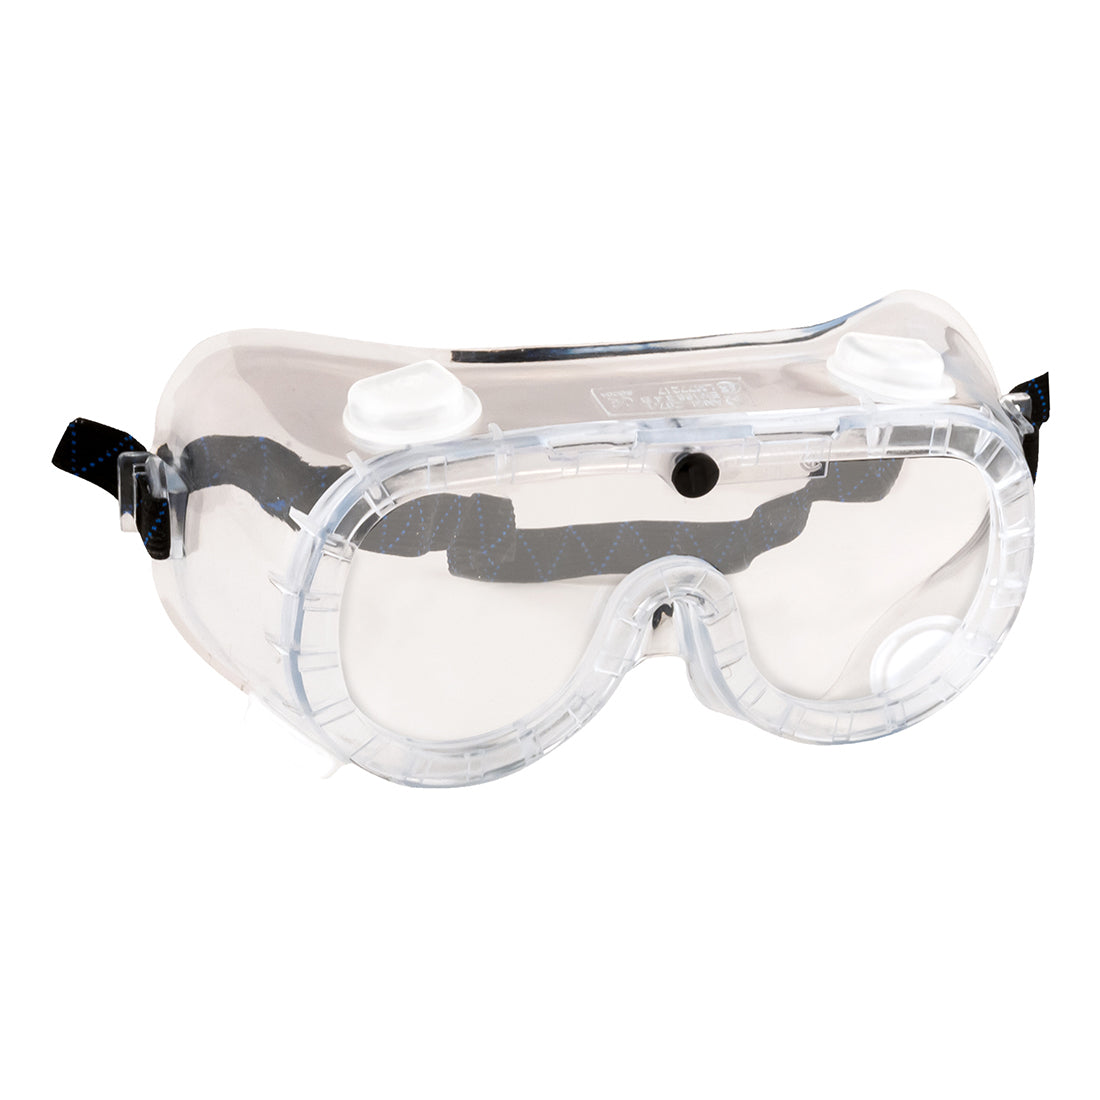 PW21 - Indirect Vent Goggle (Pack of 10)